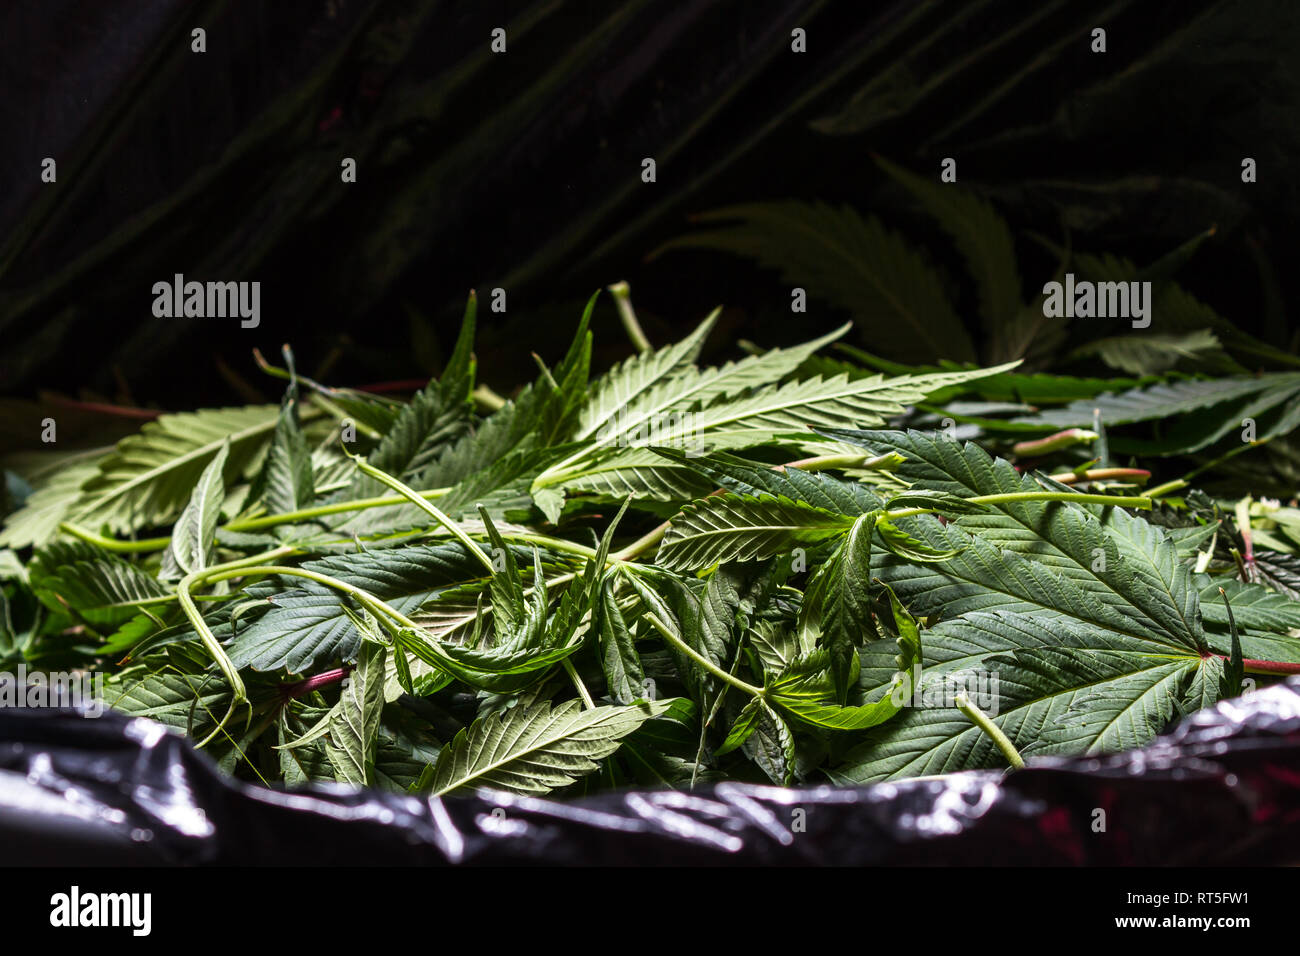 cleaning up leaves and pieces after the harvesting process of a cannabis operation Stock Photo